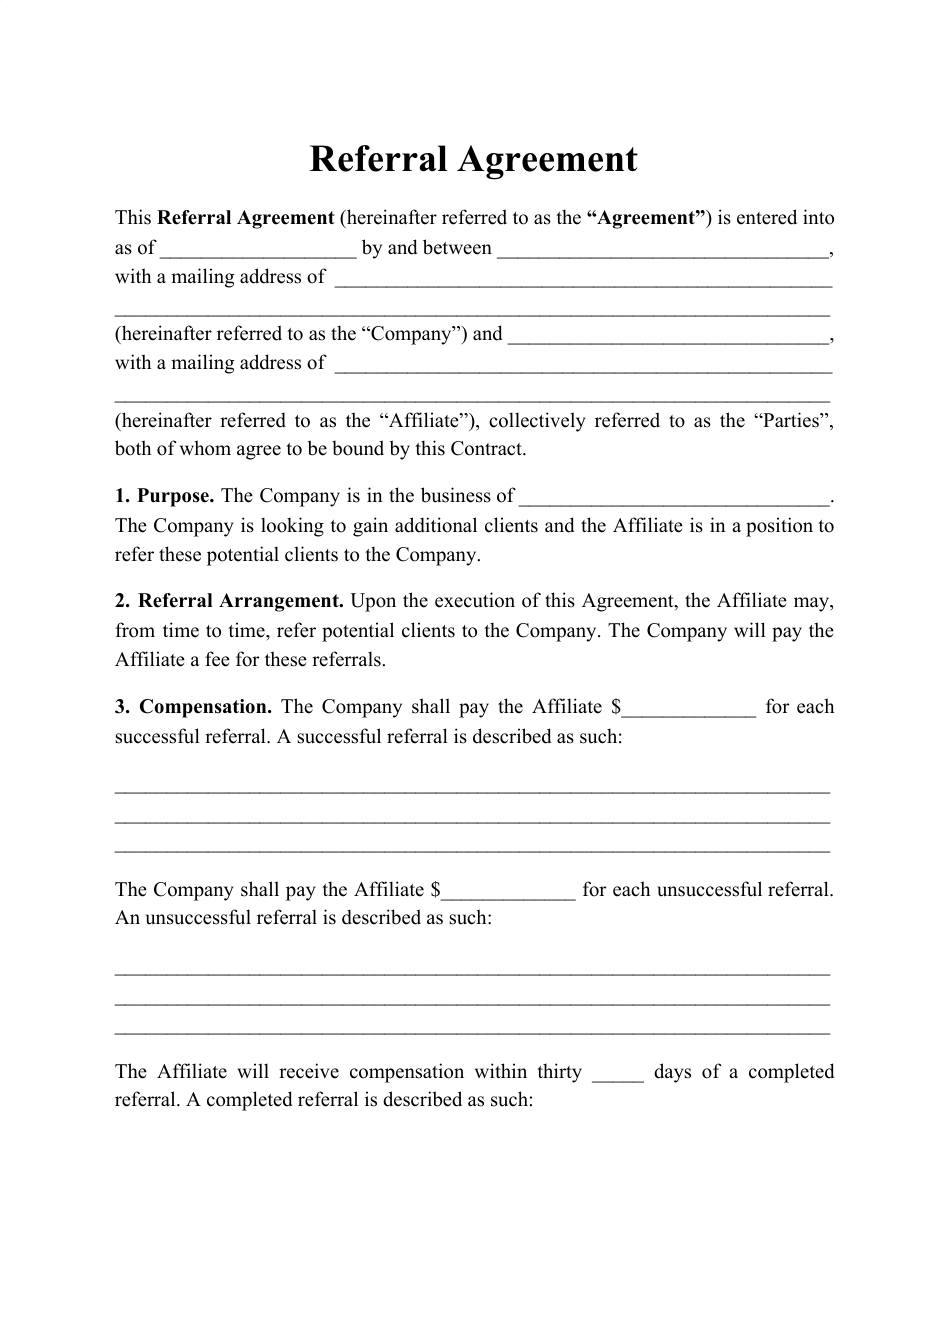 Referral Agreement Template, Page 1